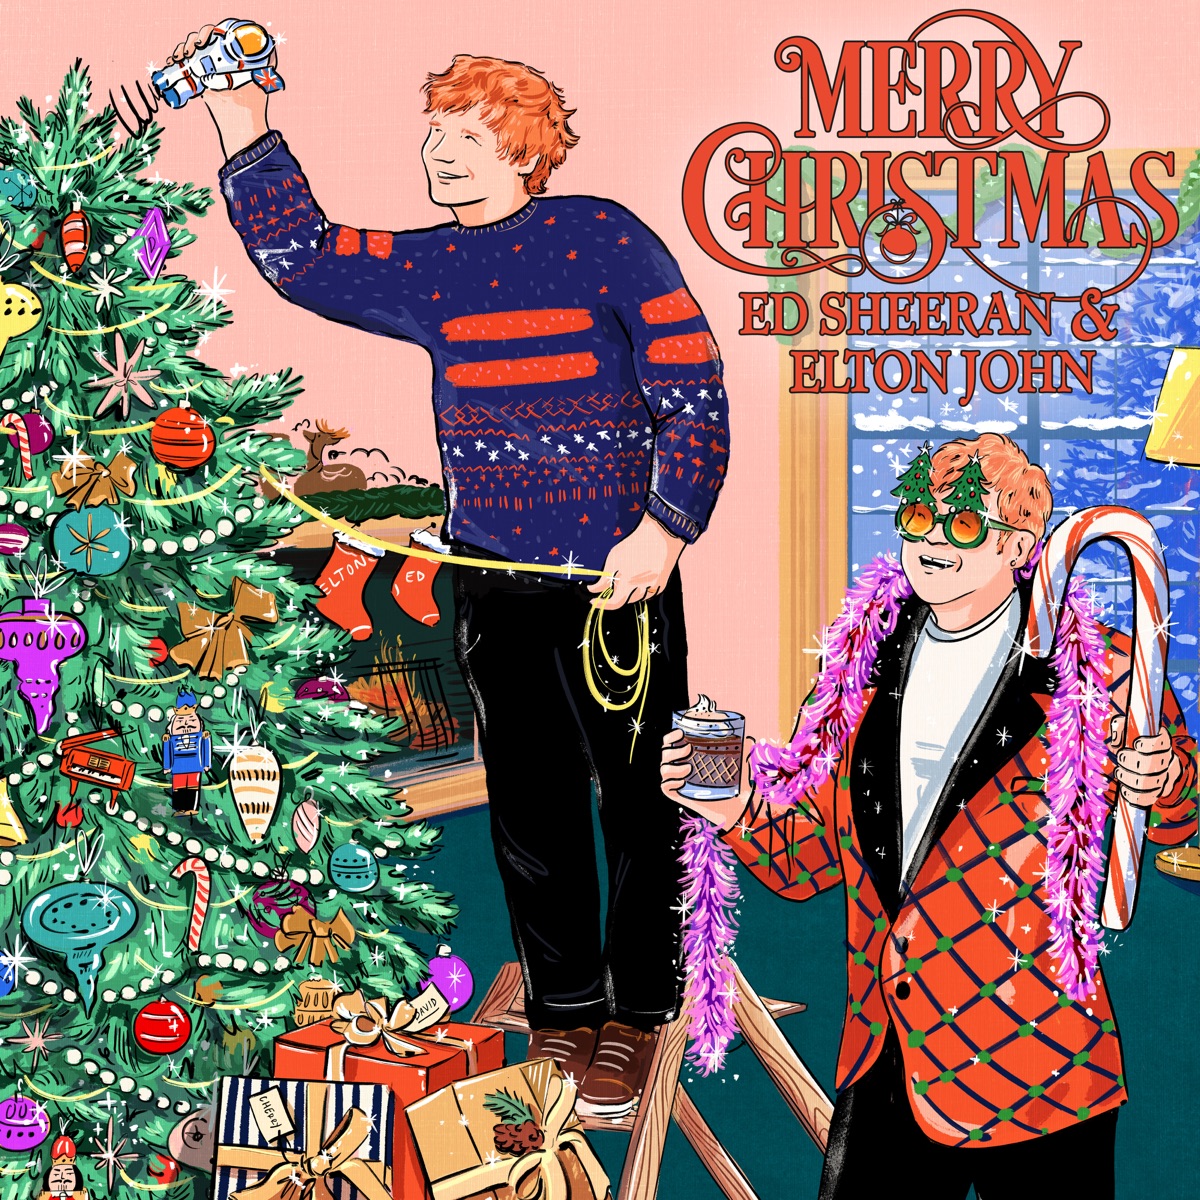 Cover for『Ed Sheeran & Elton John - Merry Christmas』from the release『Merry Christmas』